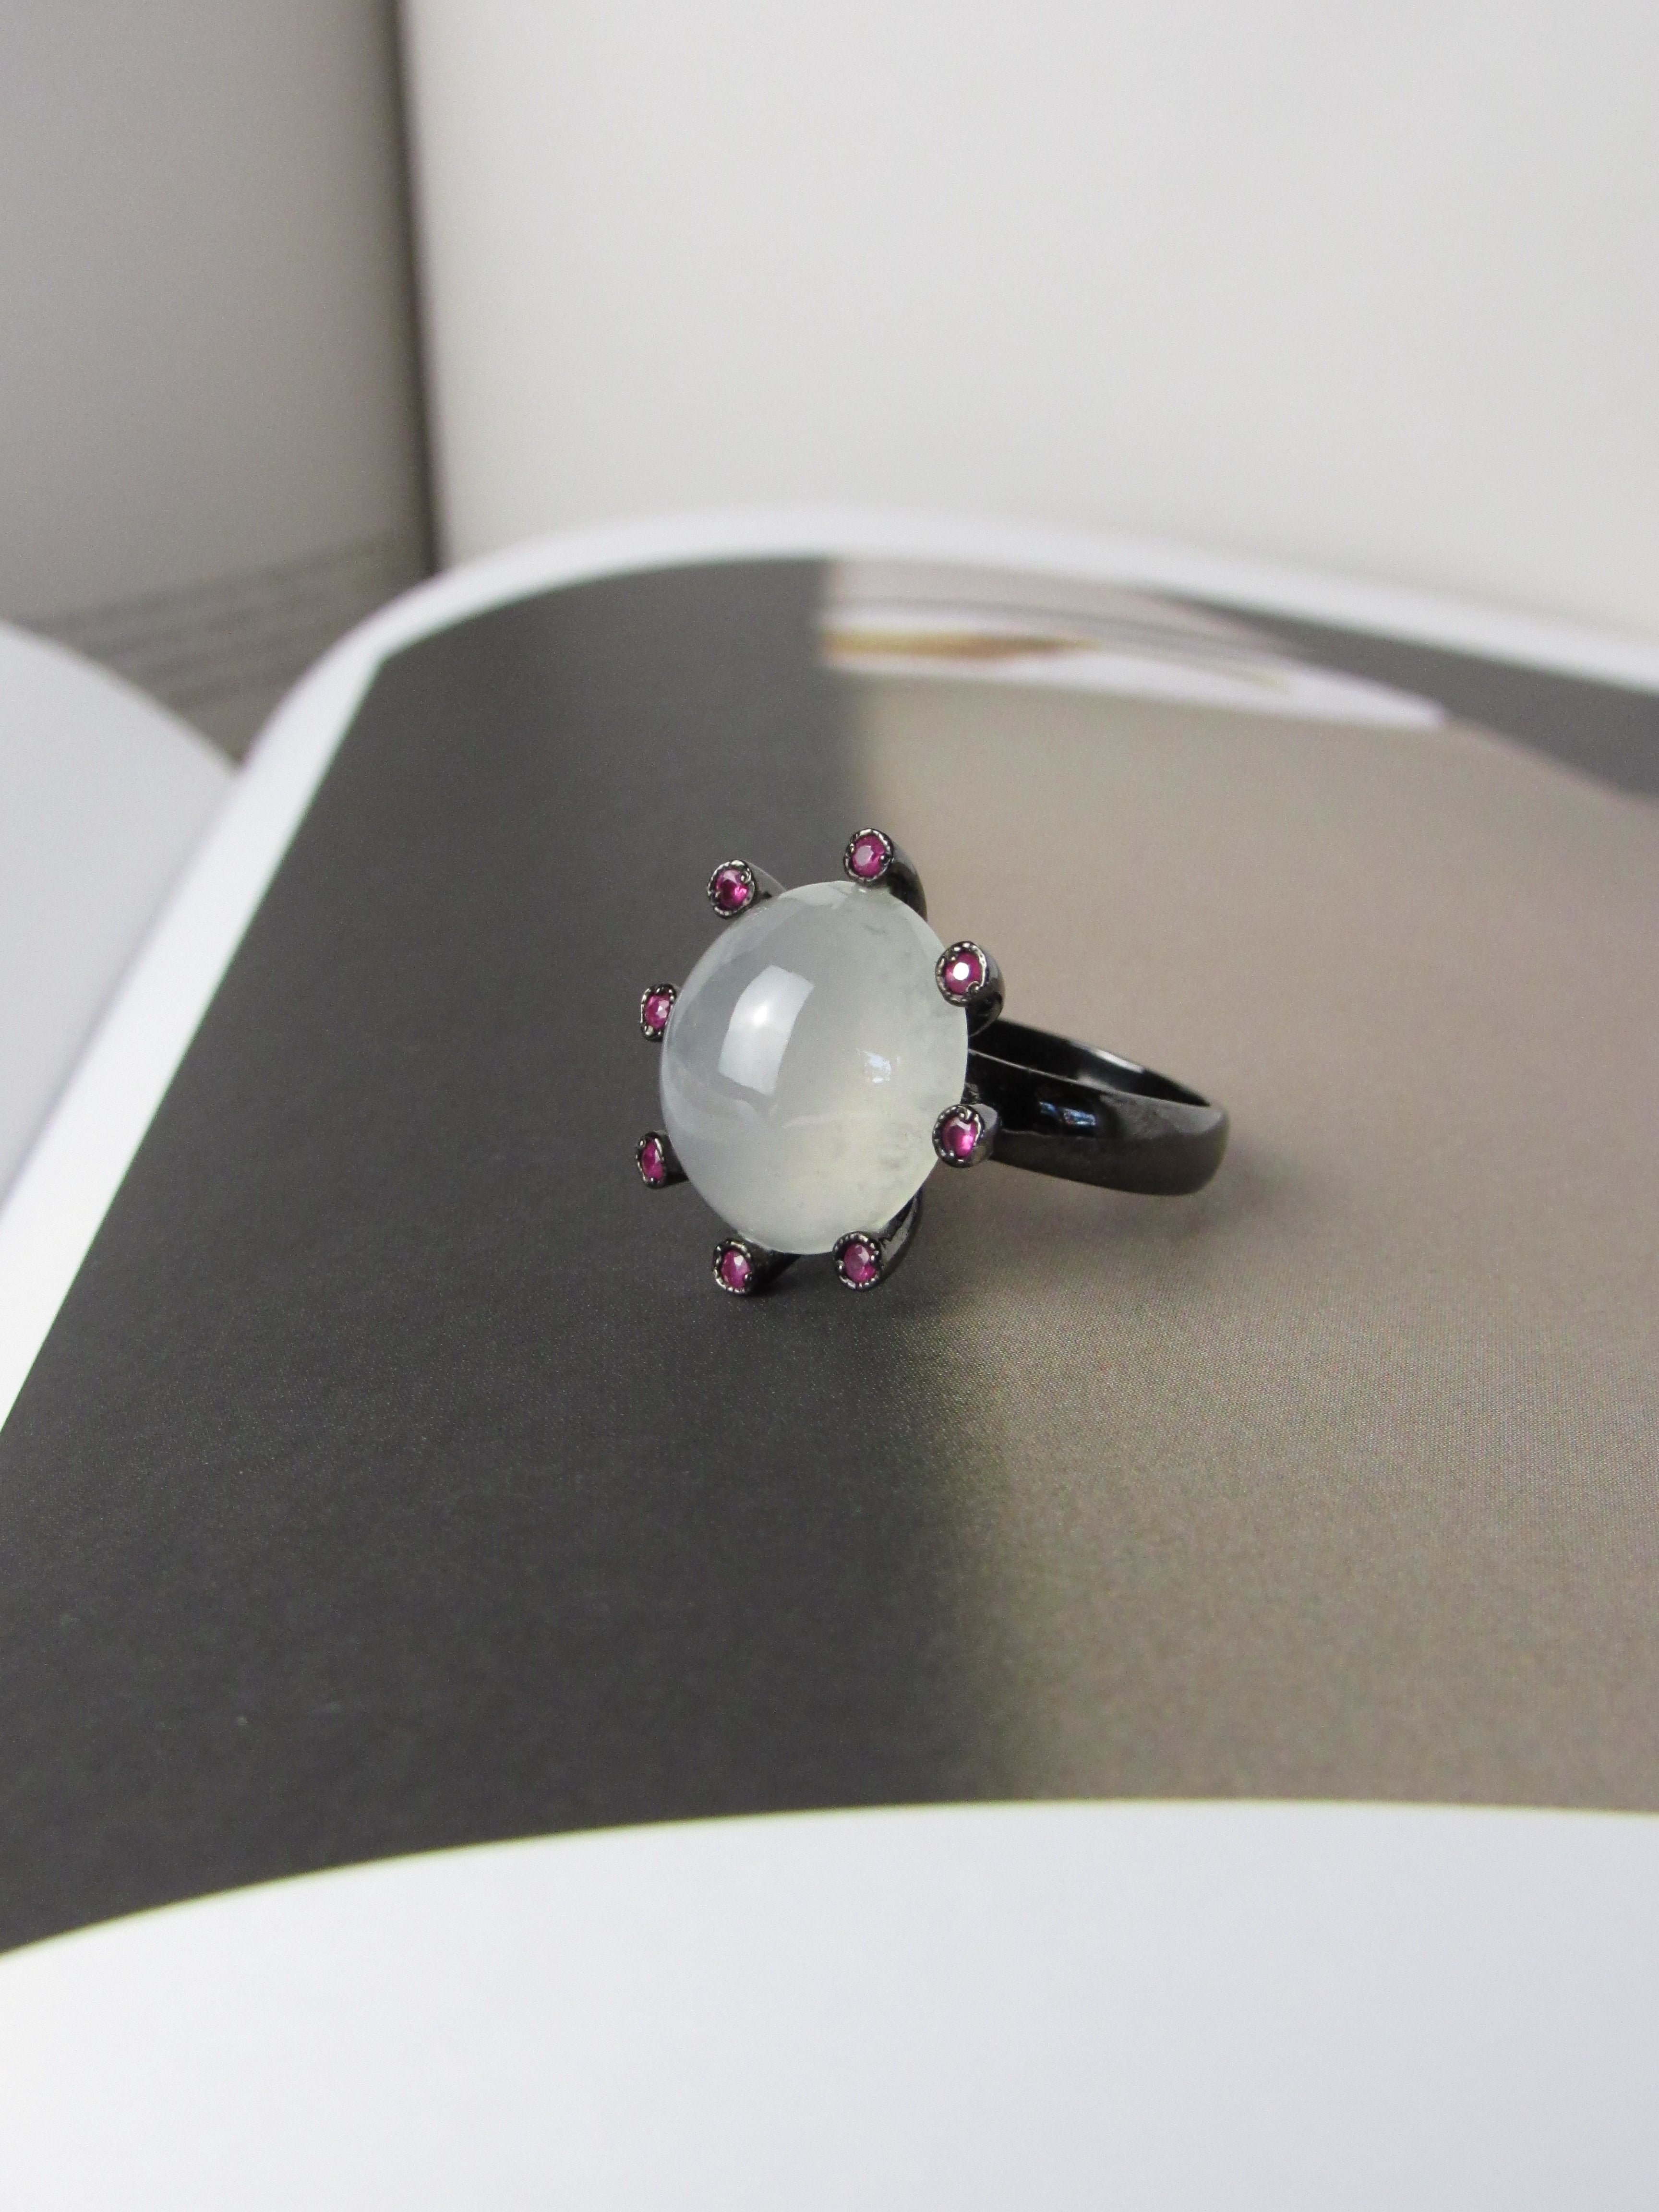 Vintage White Icy Jadeite Jade and Ruby with Oxidized Silver Ring